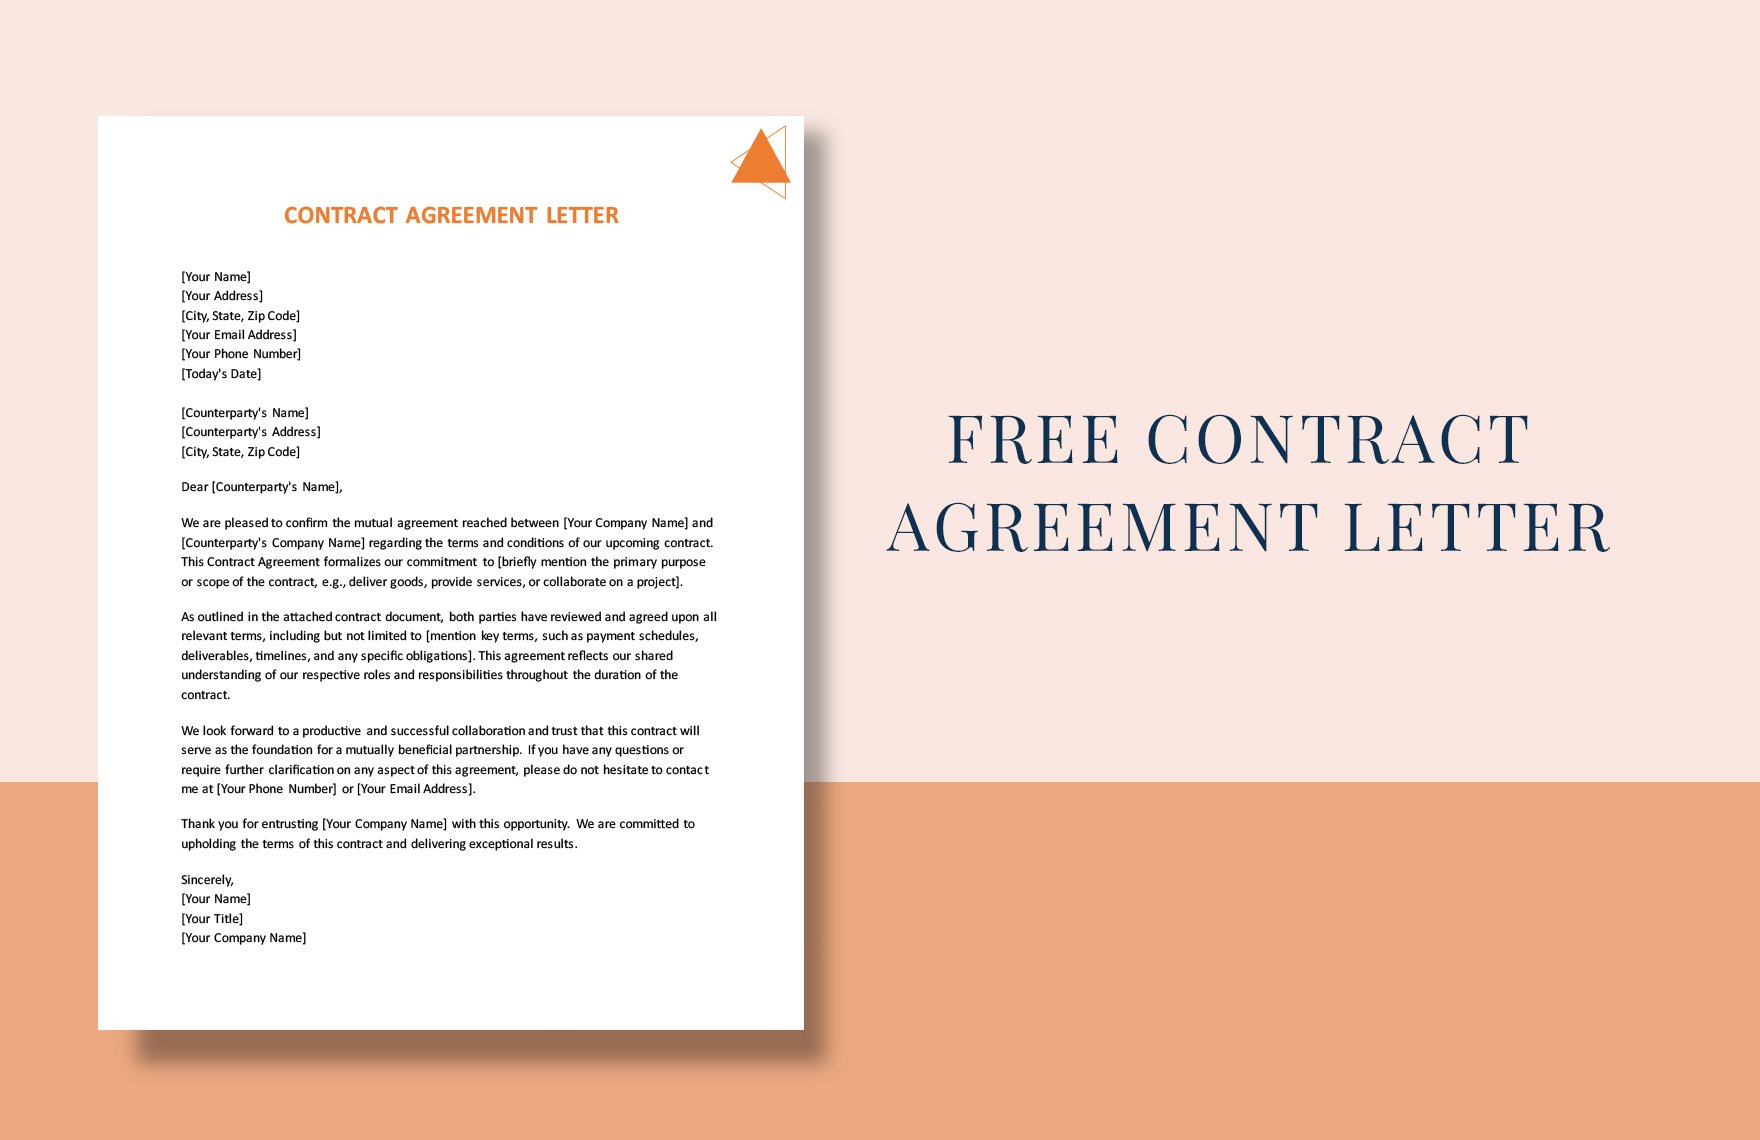 Contract Agreement Letter